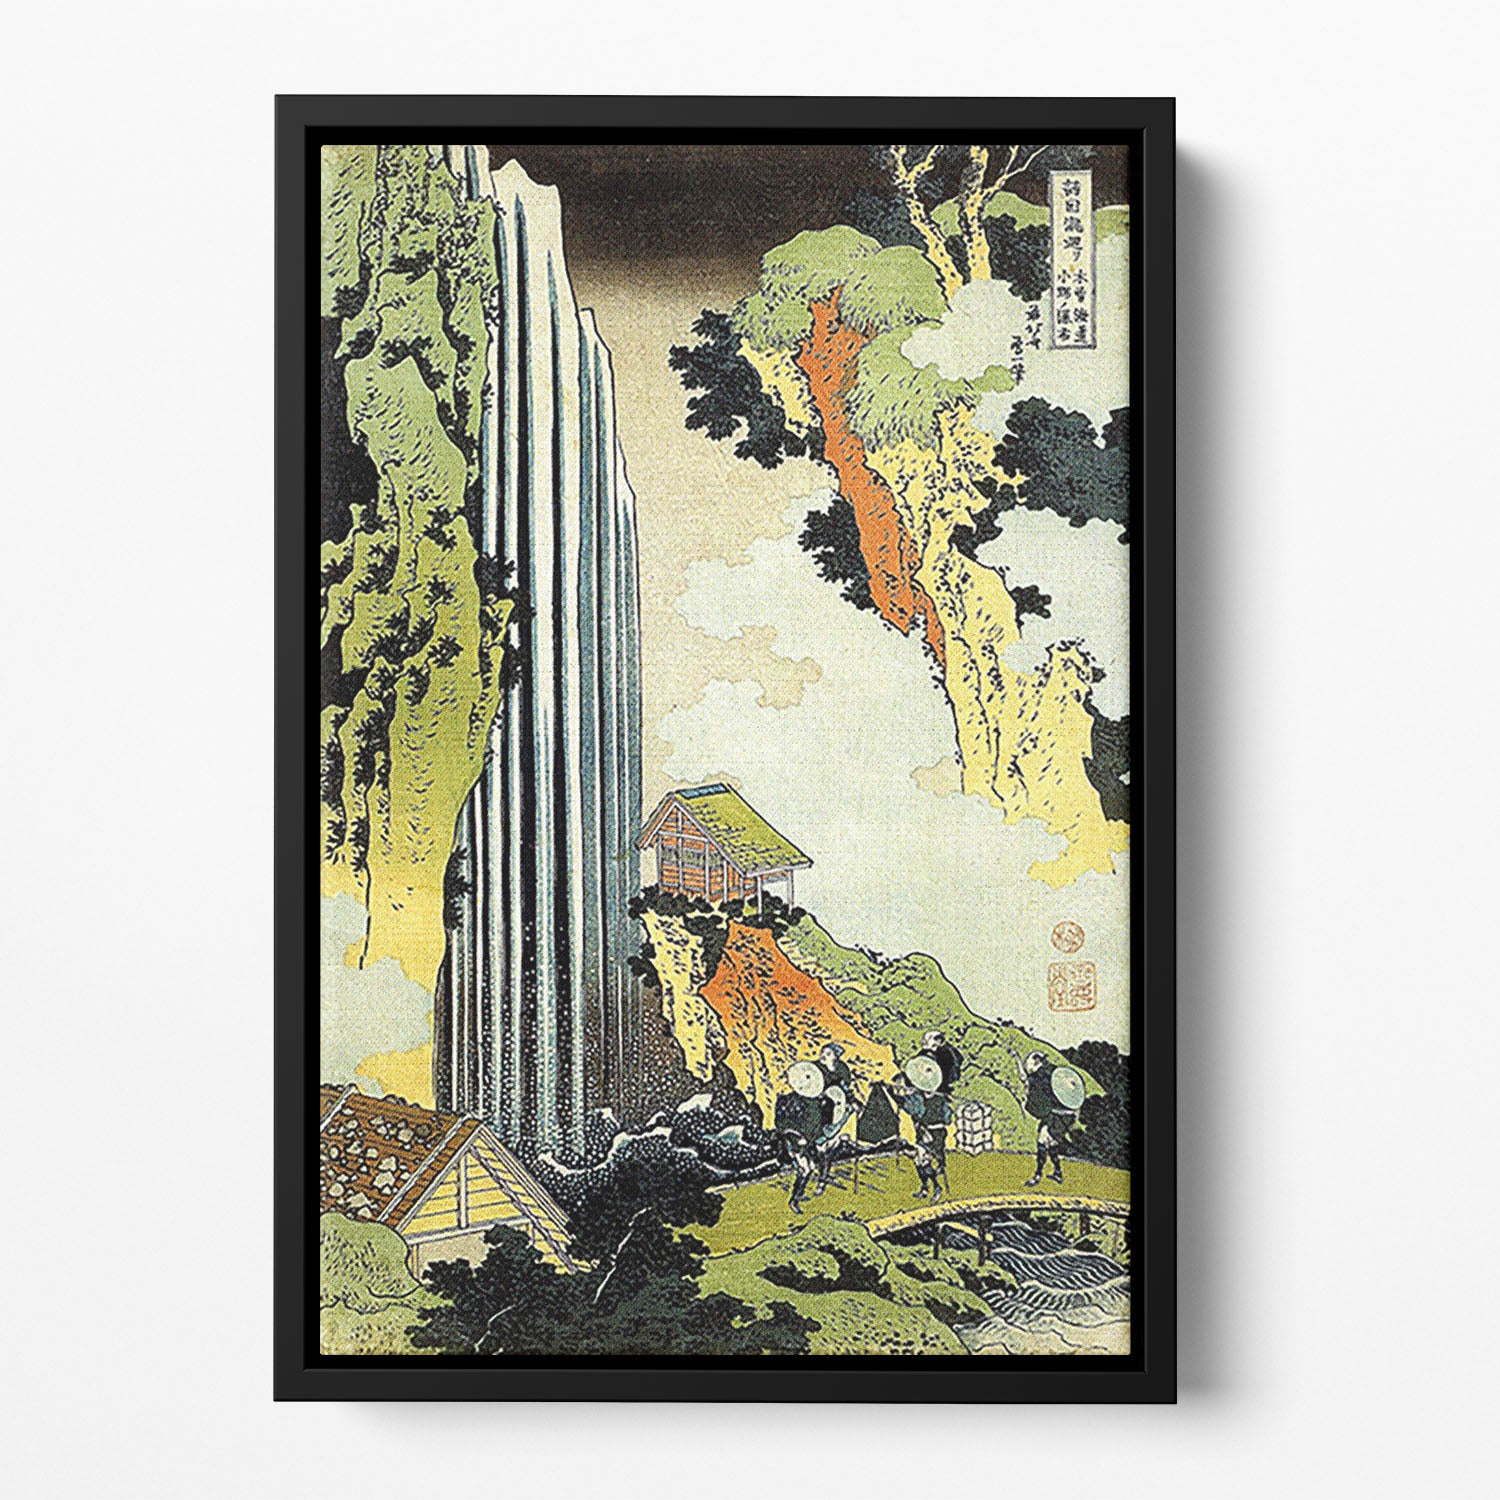 Waterfall by Hokusai Floating Framed Canvas